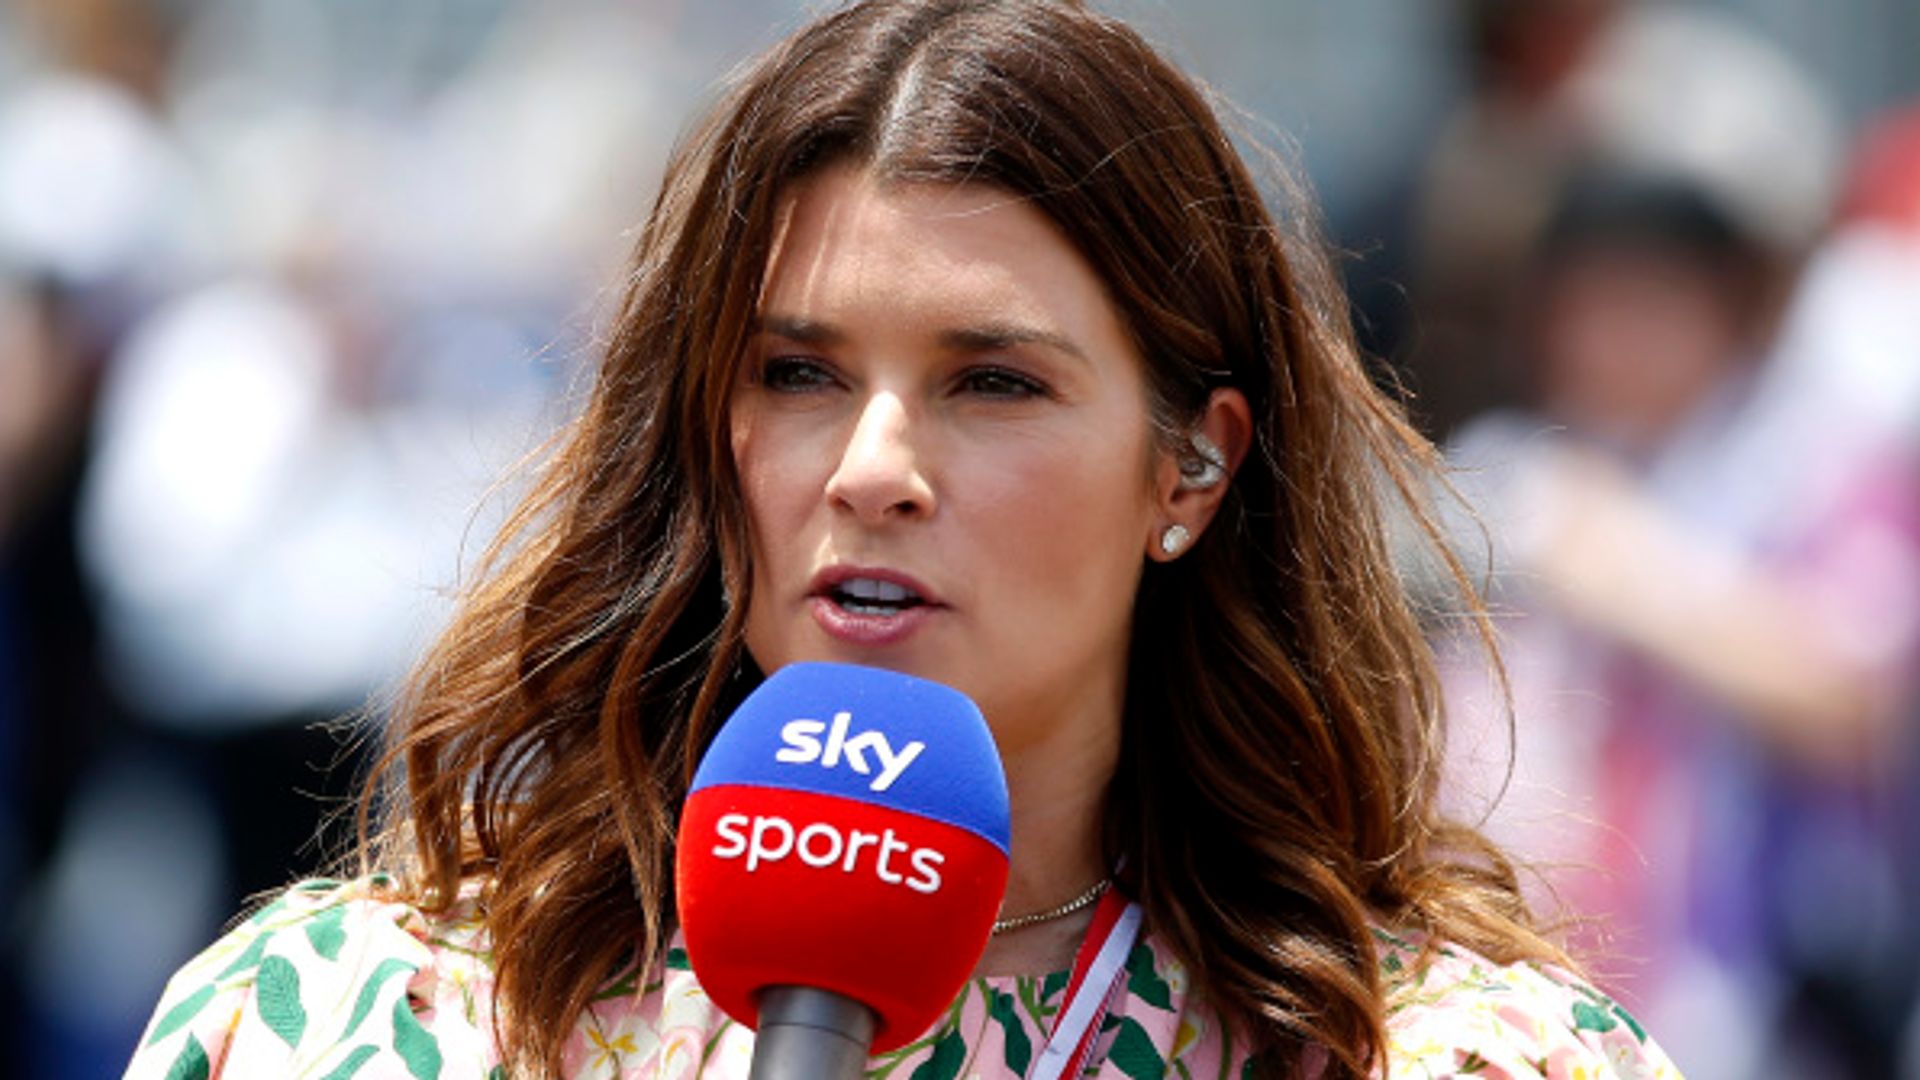 Sky Sports F1 Podcast: Patrick says women should take 'normal' route to F1